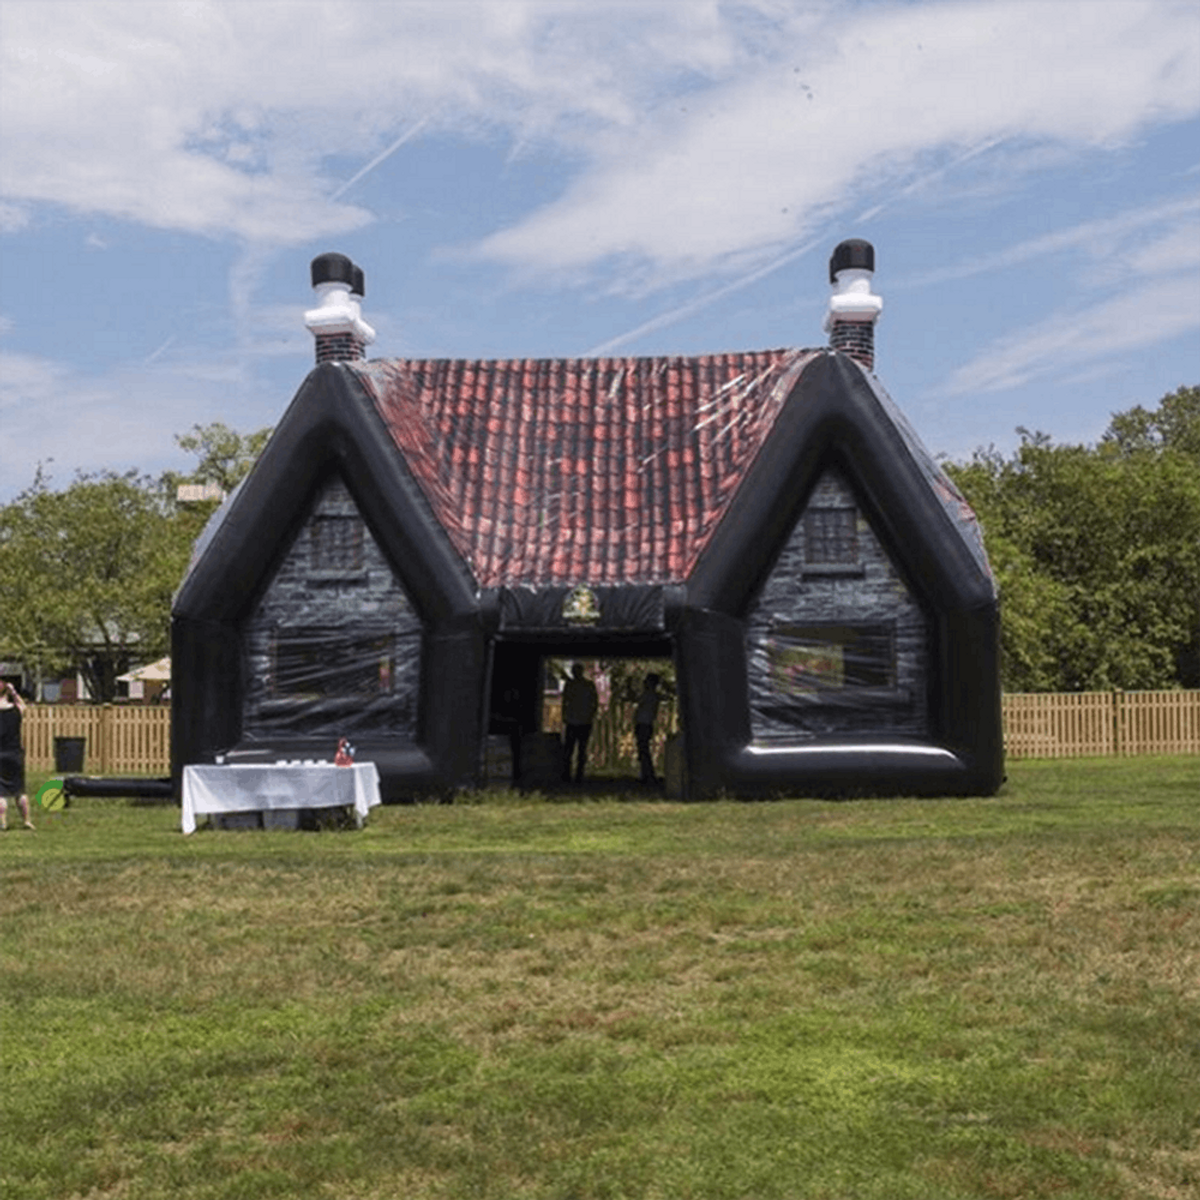 You Can Now Rent an Inflatable Pub for Your Next Party